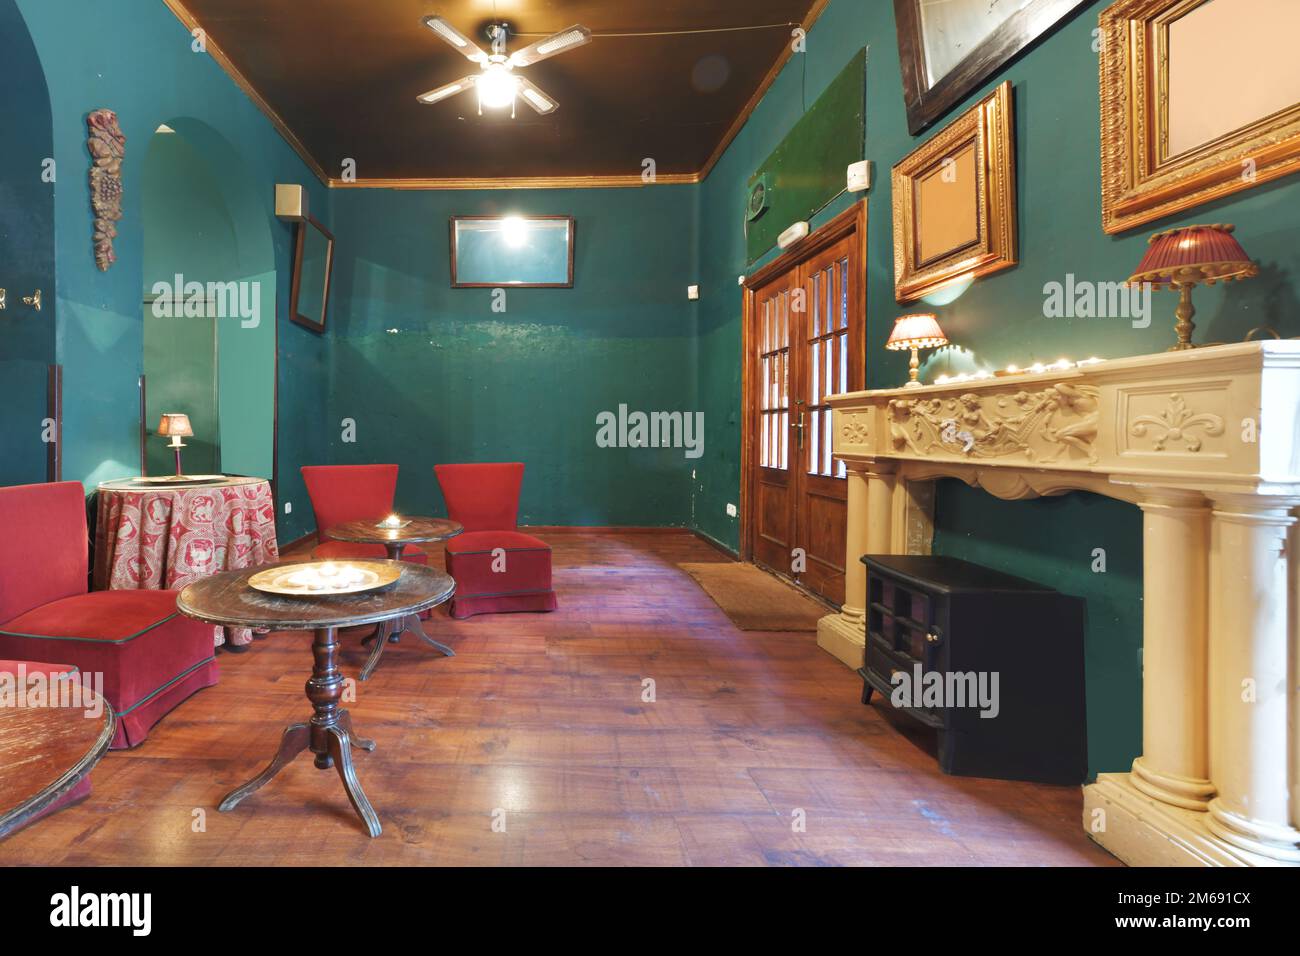 Hall of a vintage-style bar with green walls, a marble fireplace and armchairs upholstered in red fabric, round wooden tables and a fan with blades on Stock Photo